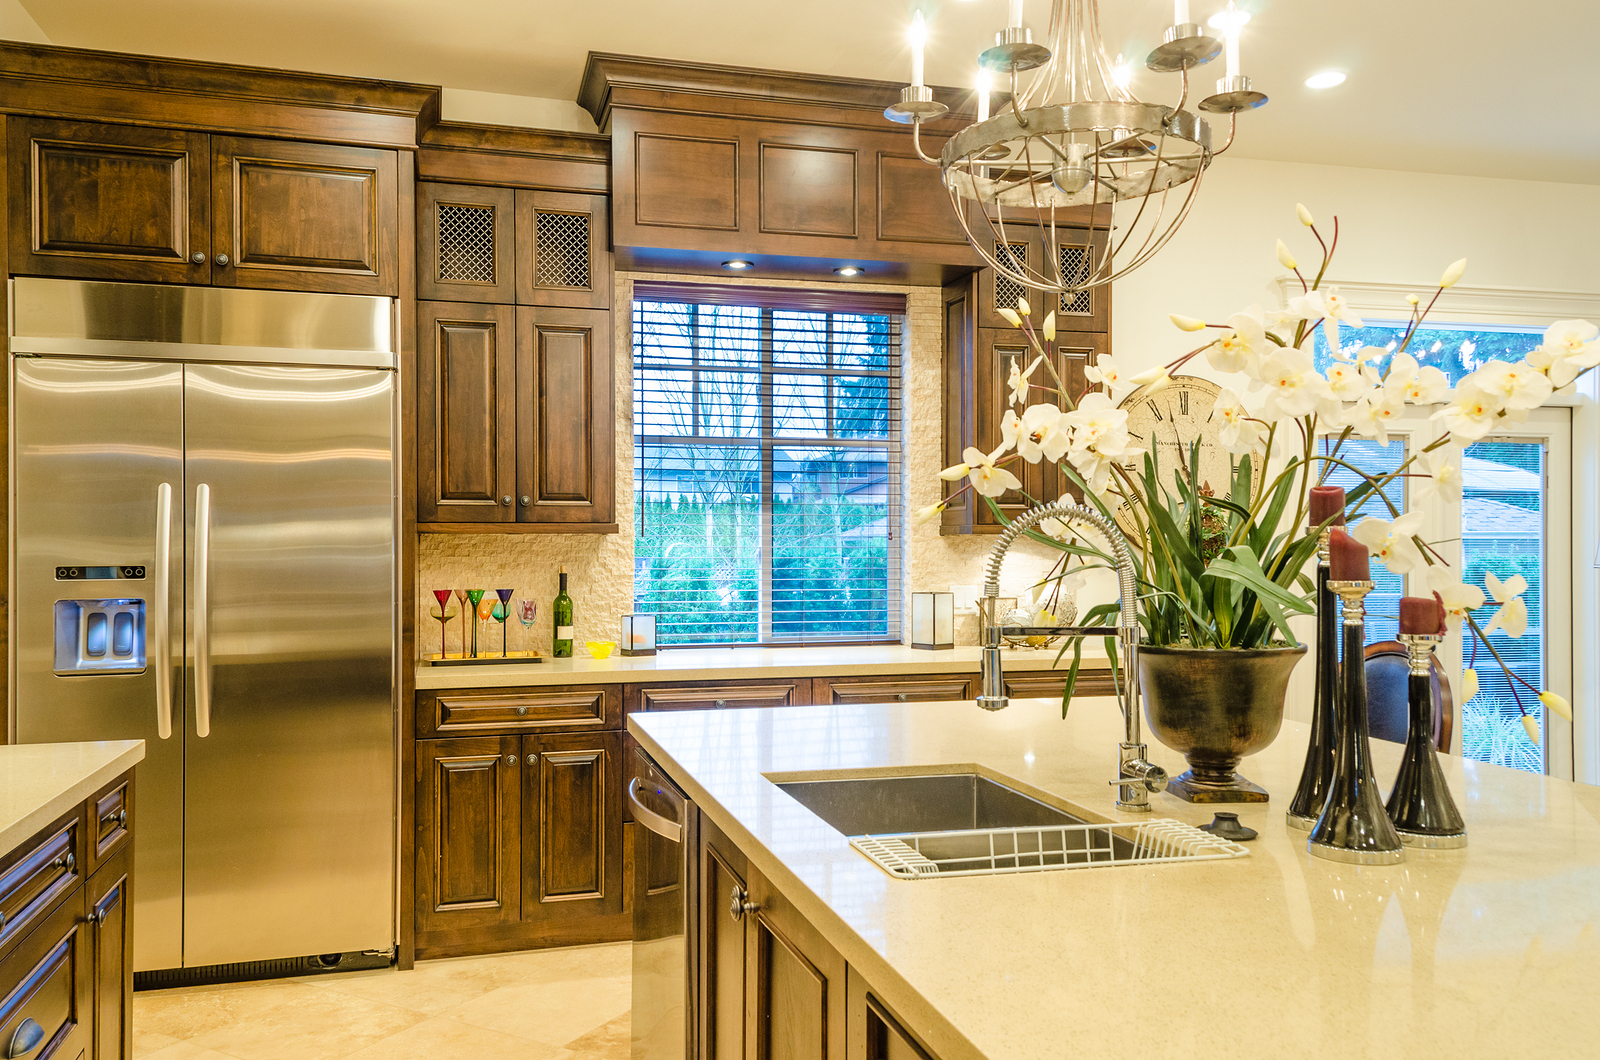 Gourmet kitchen with custom cabinetry